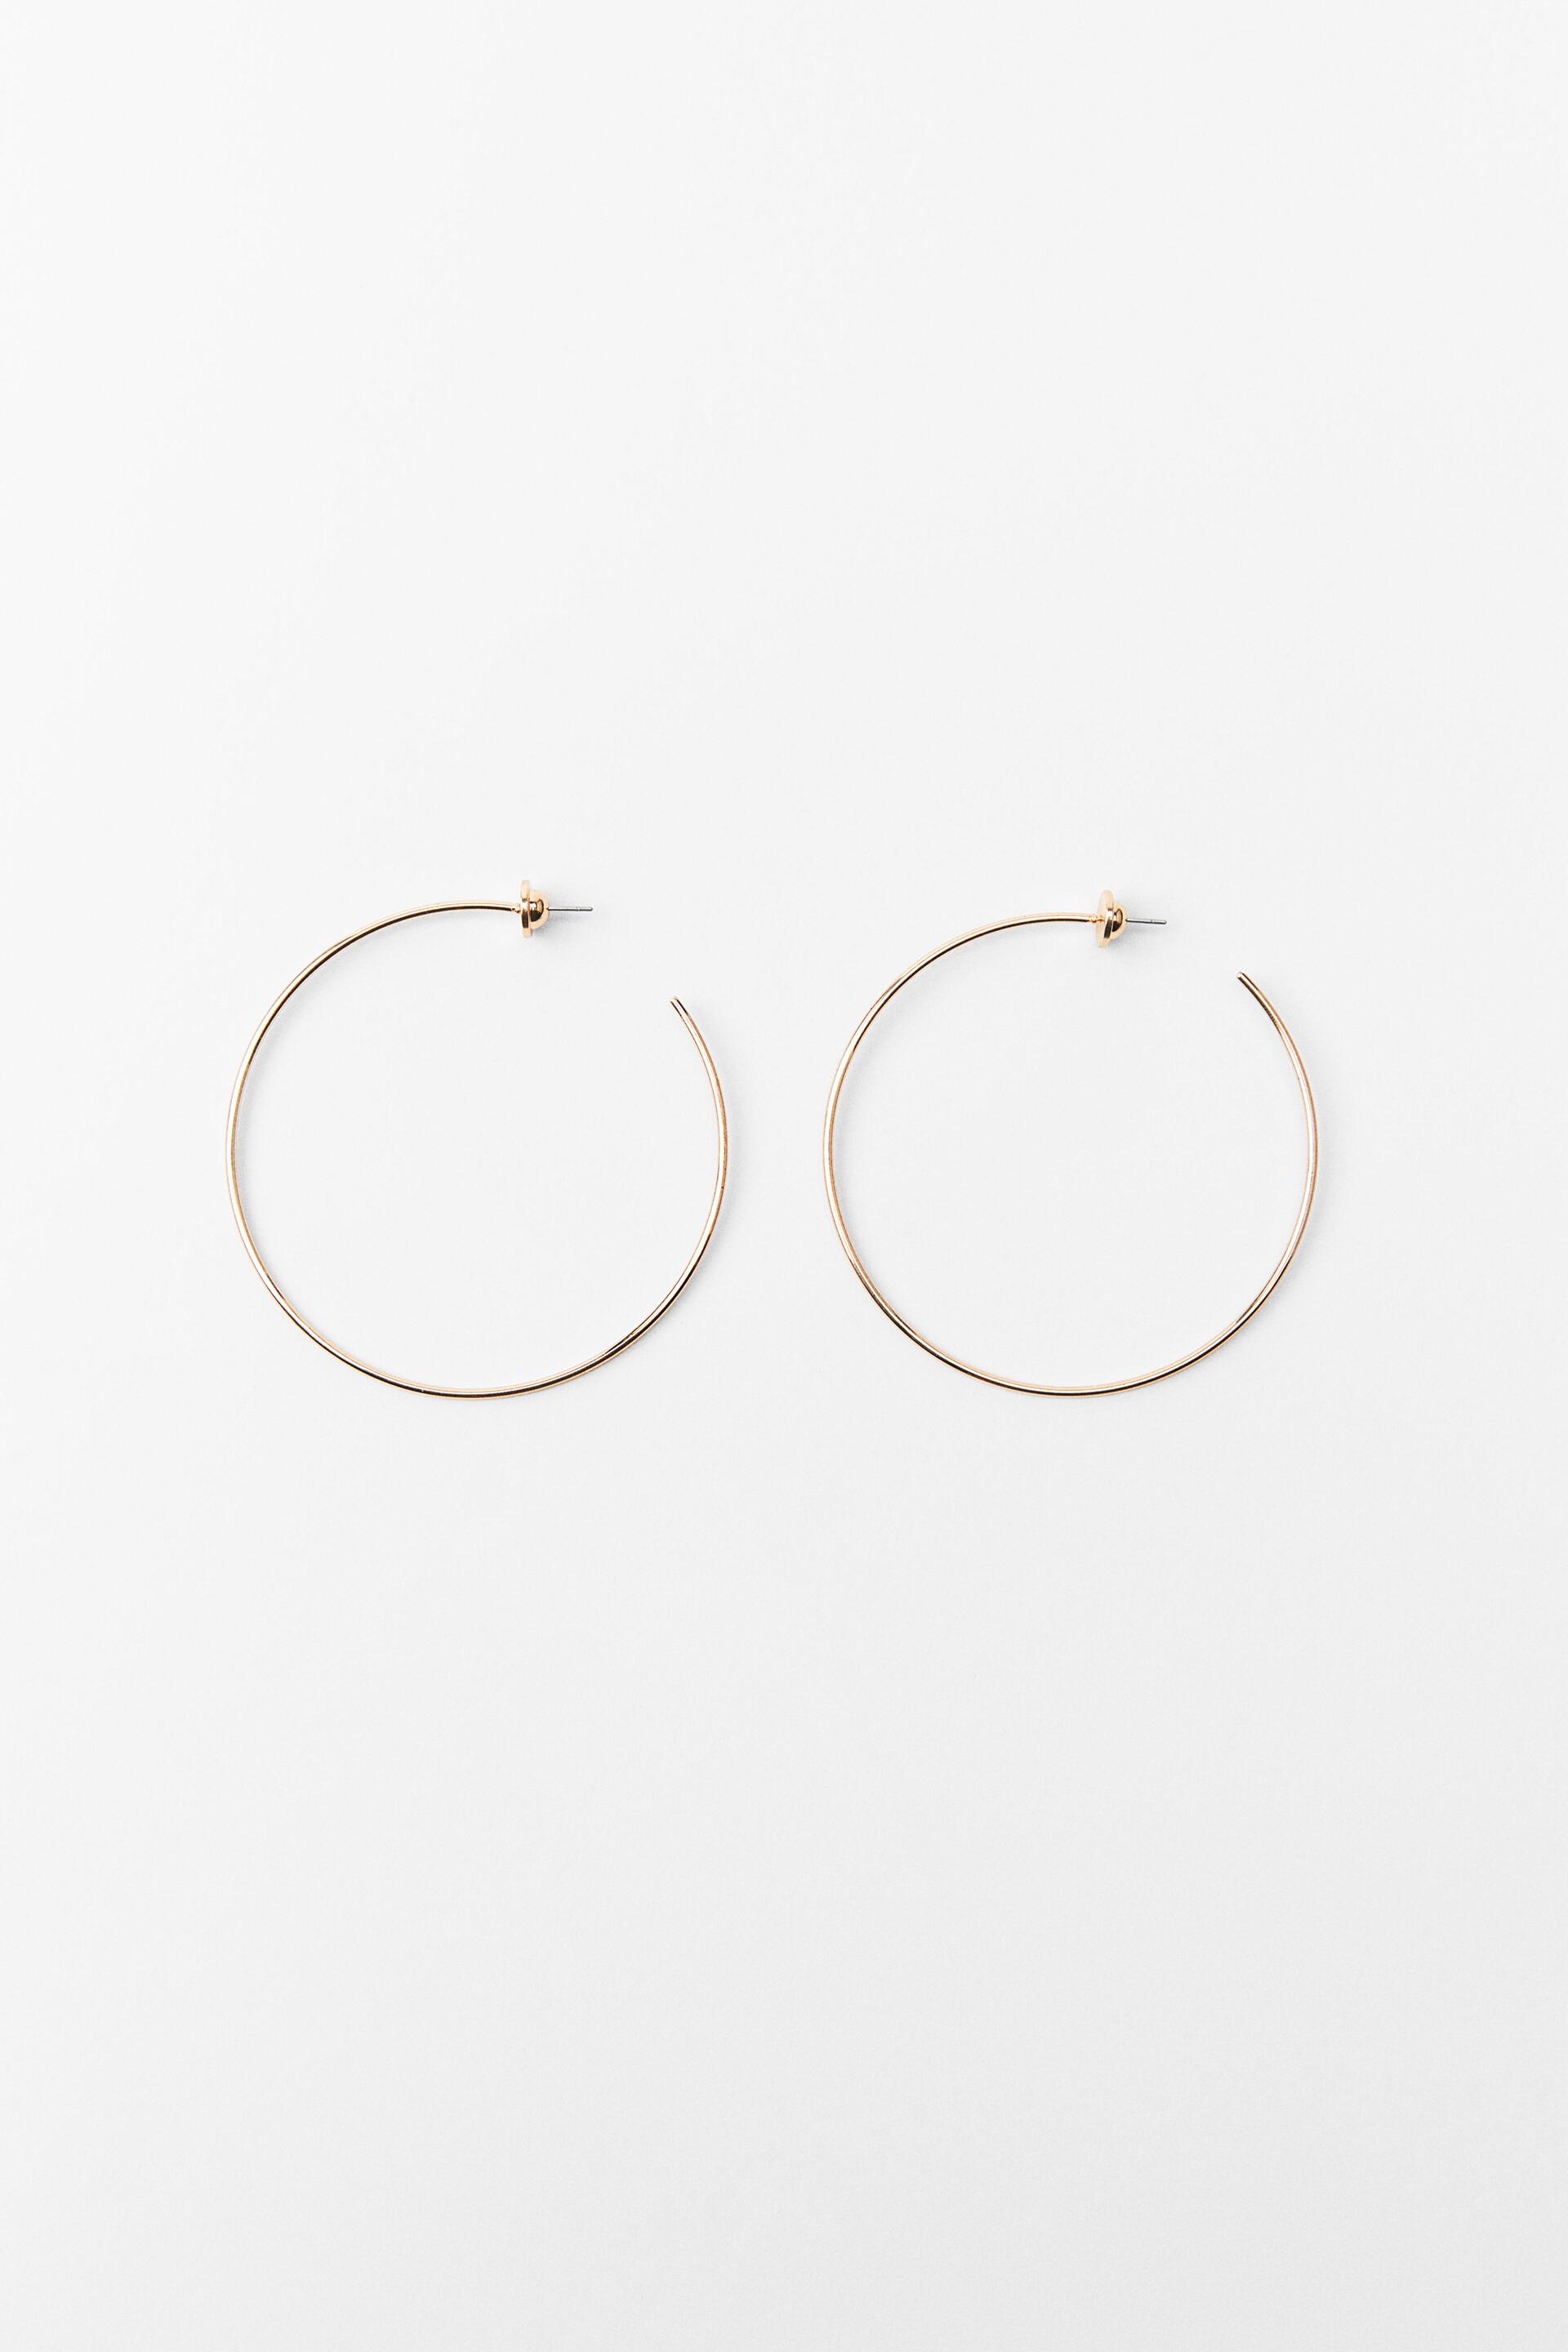 ZARA Large Monday to Friday Fine Hoops